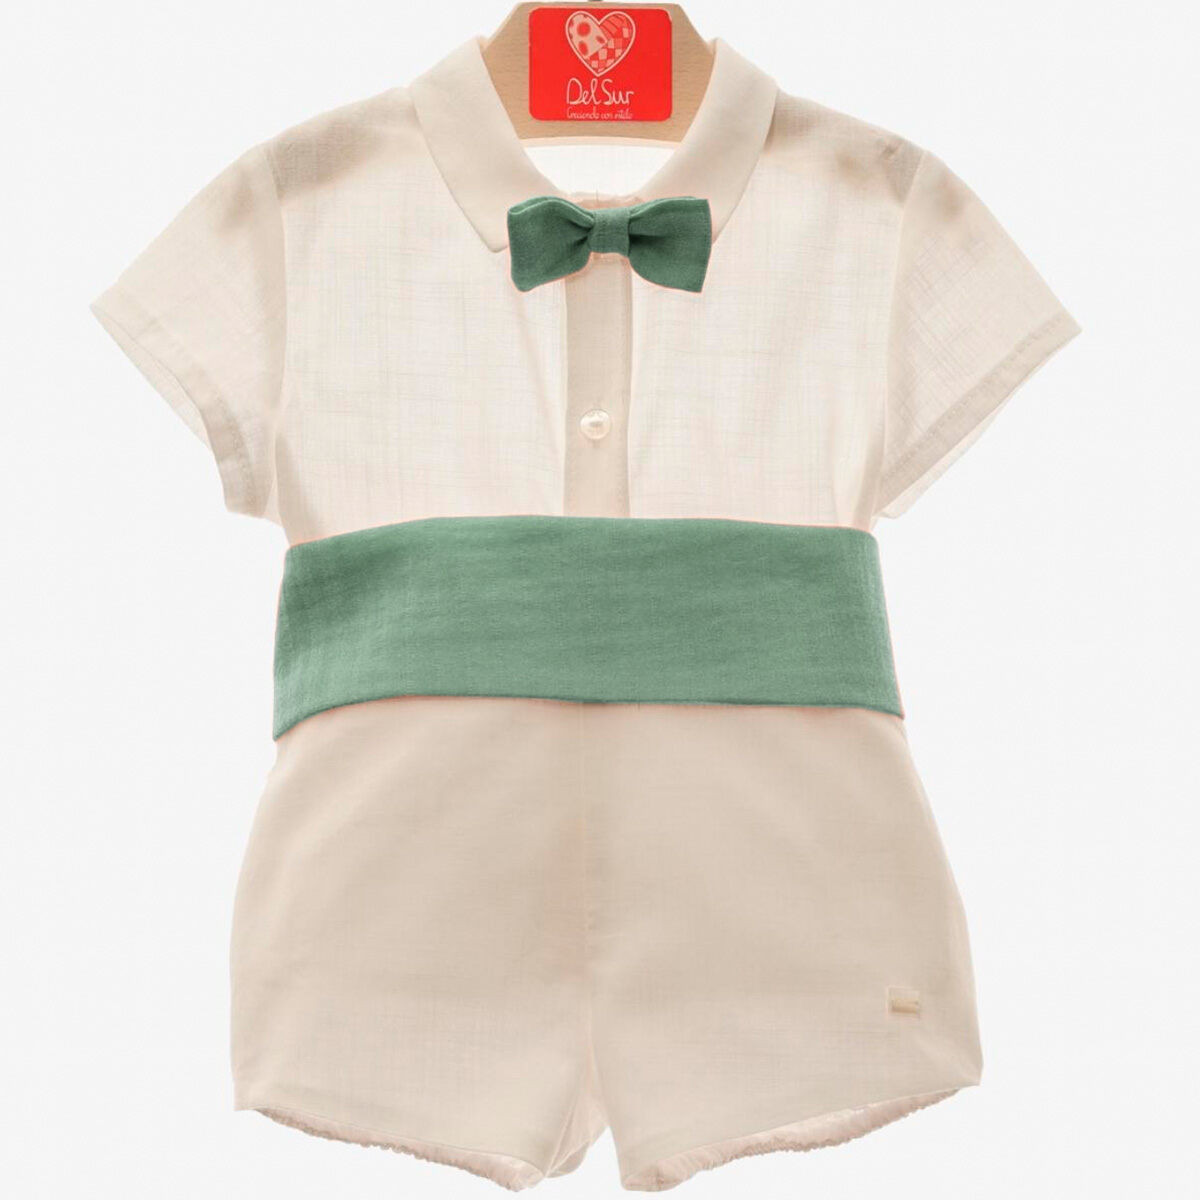 POLO WITH BOW TIE AND PANTS WAISTBAND GREEN DELSUR - 1